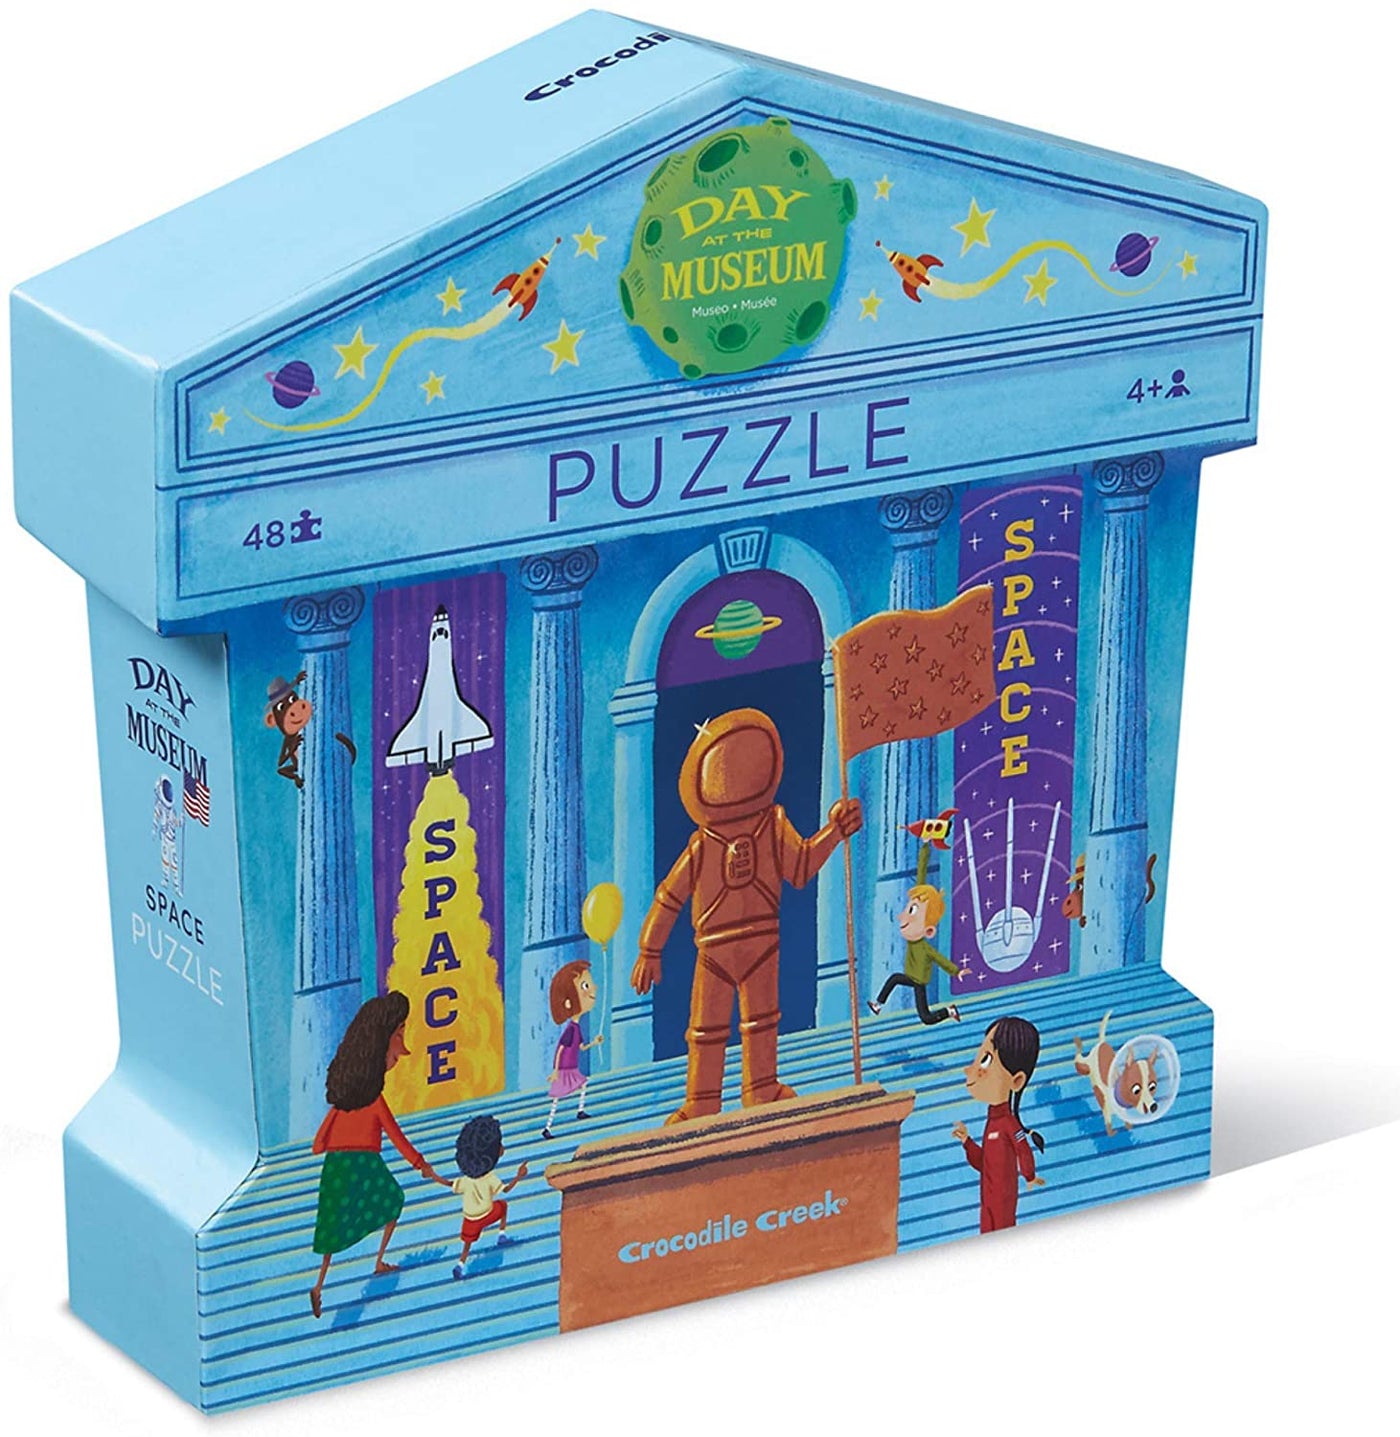 DAY AT THE MUSEUM/SPACE 48-PC PUZZLE